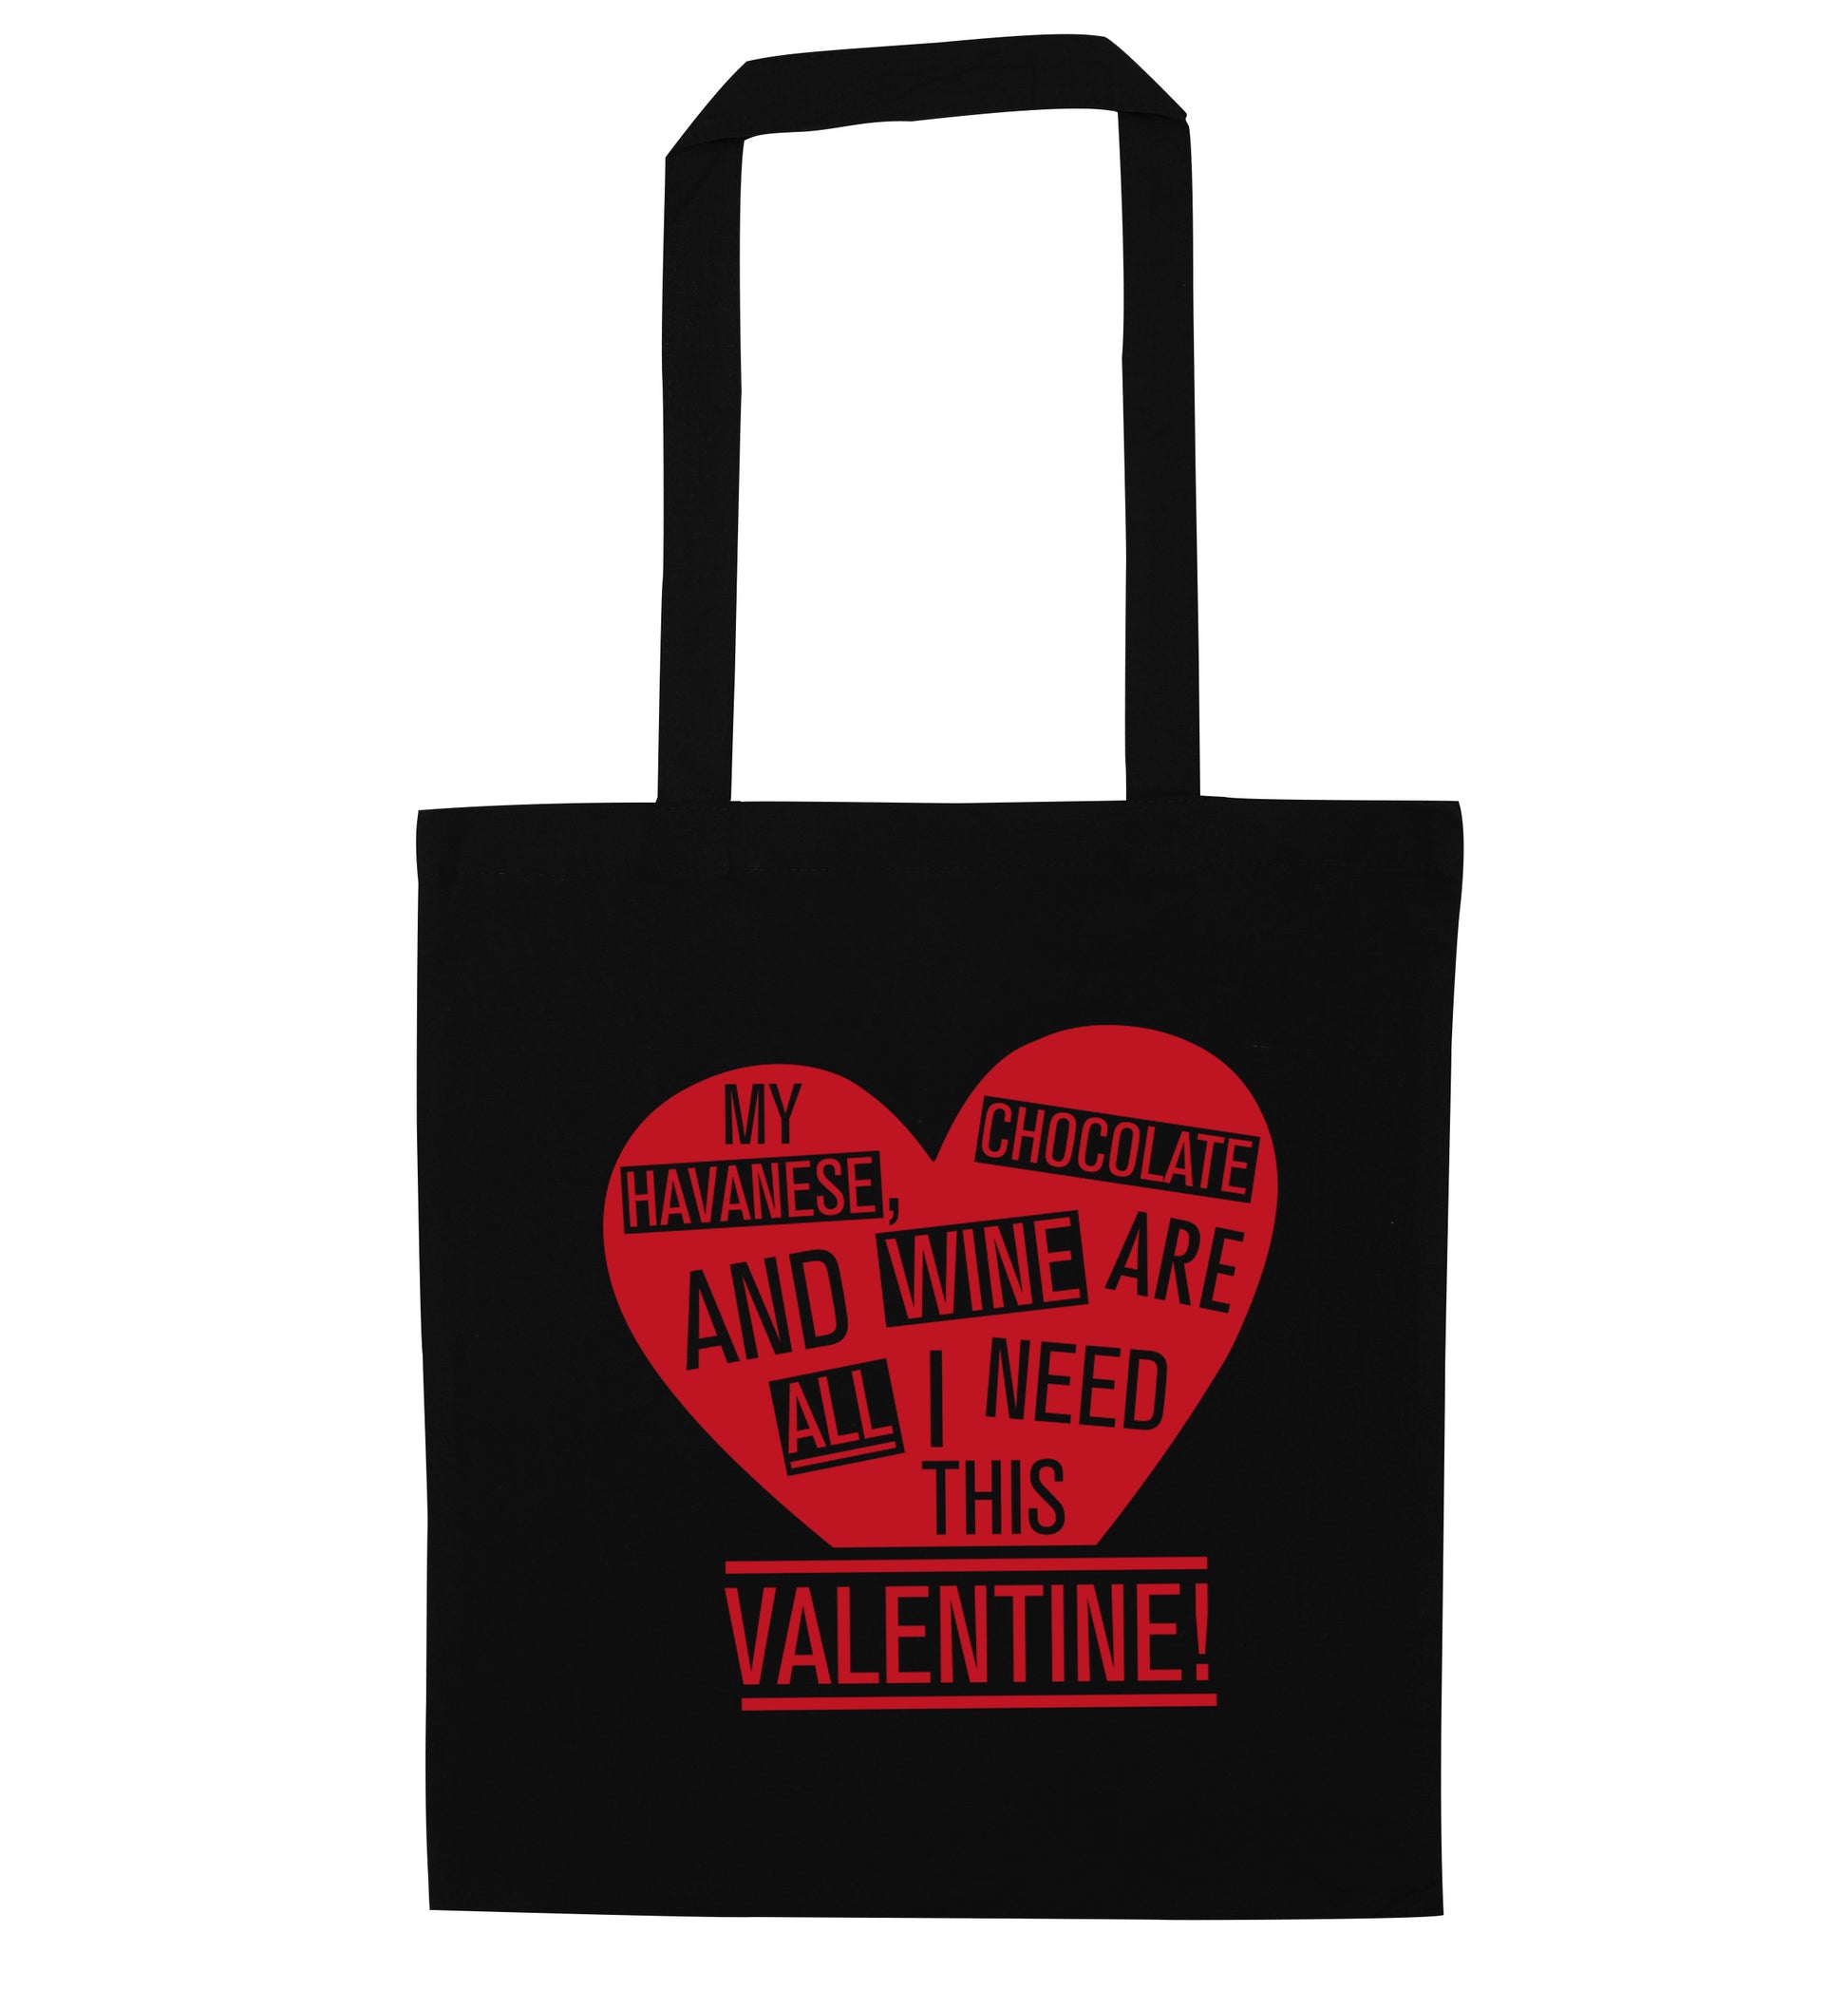 My havanese, chocolate and wine are all I need this valentine! black tote bag